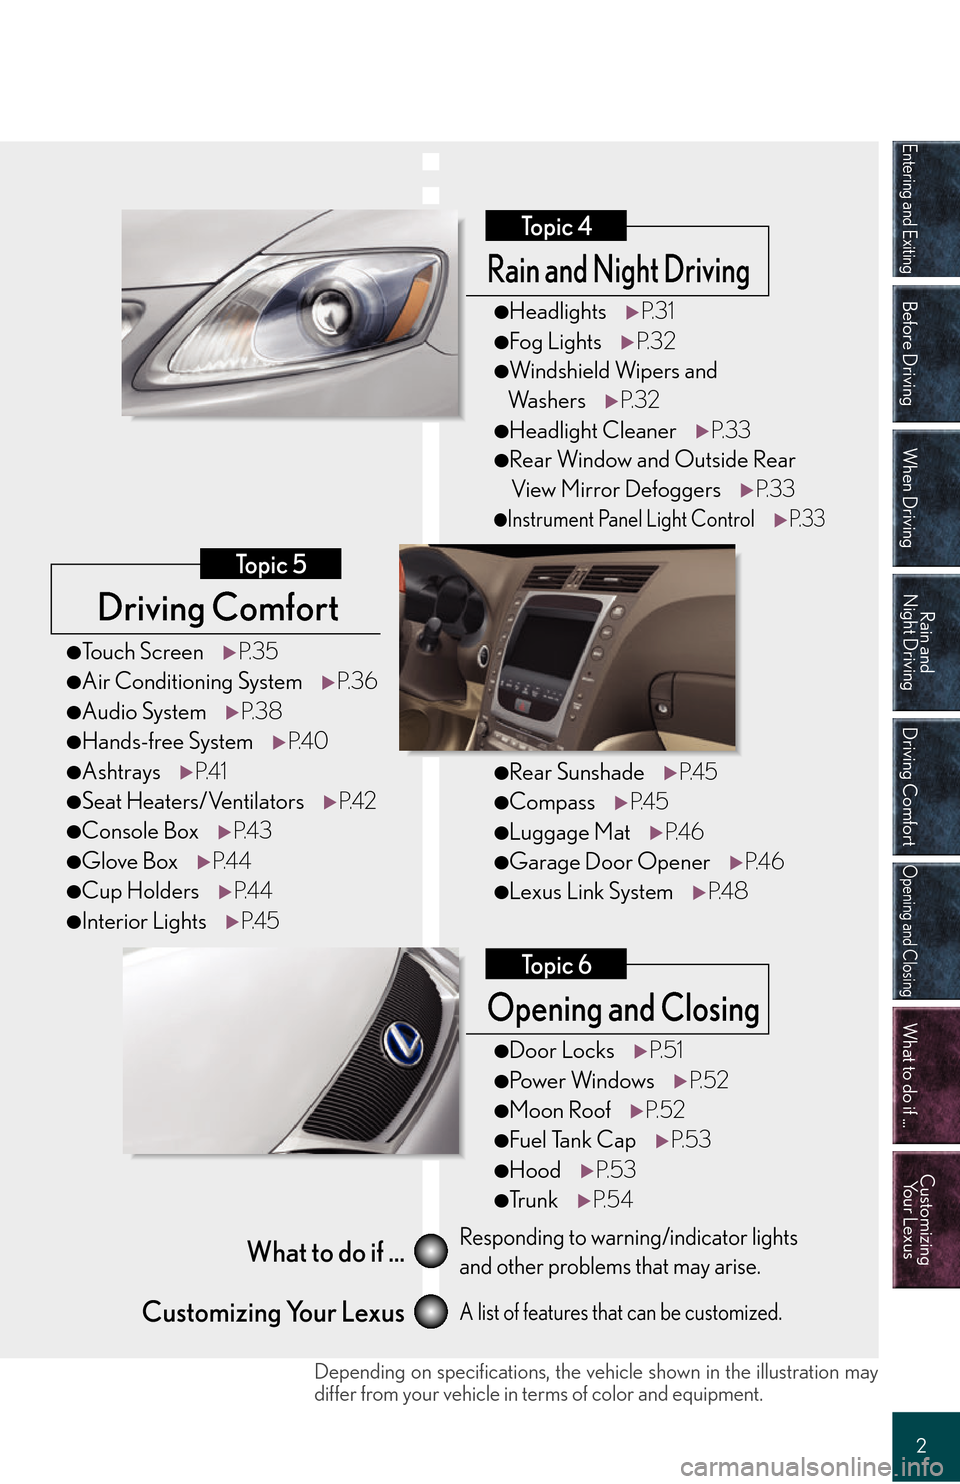 Lexus GS450h 2008  Do-it-yourself maintenance / LEXUS 2008 GS450H QUICK GUIDE OWNERS MANUAL (OM30B13U) Entering and Exiting
Before Driving
When Driving
Rain and 
Night Driving
Driving Comfort
Opening and Closing
What to do if ...
Customizing Yo u r  L e x u s
2
Driving Comfort
Topic 5
Opening and Closi